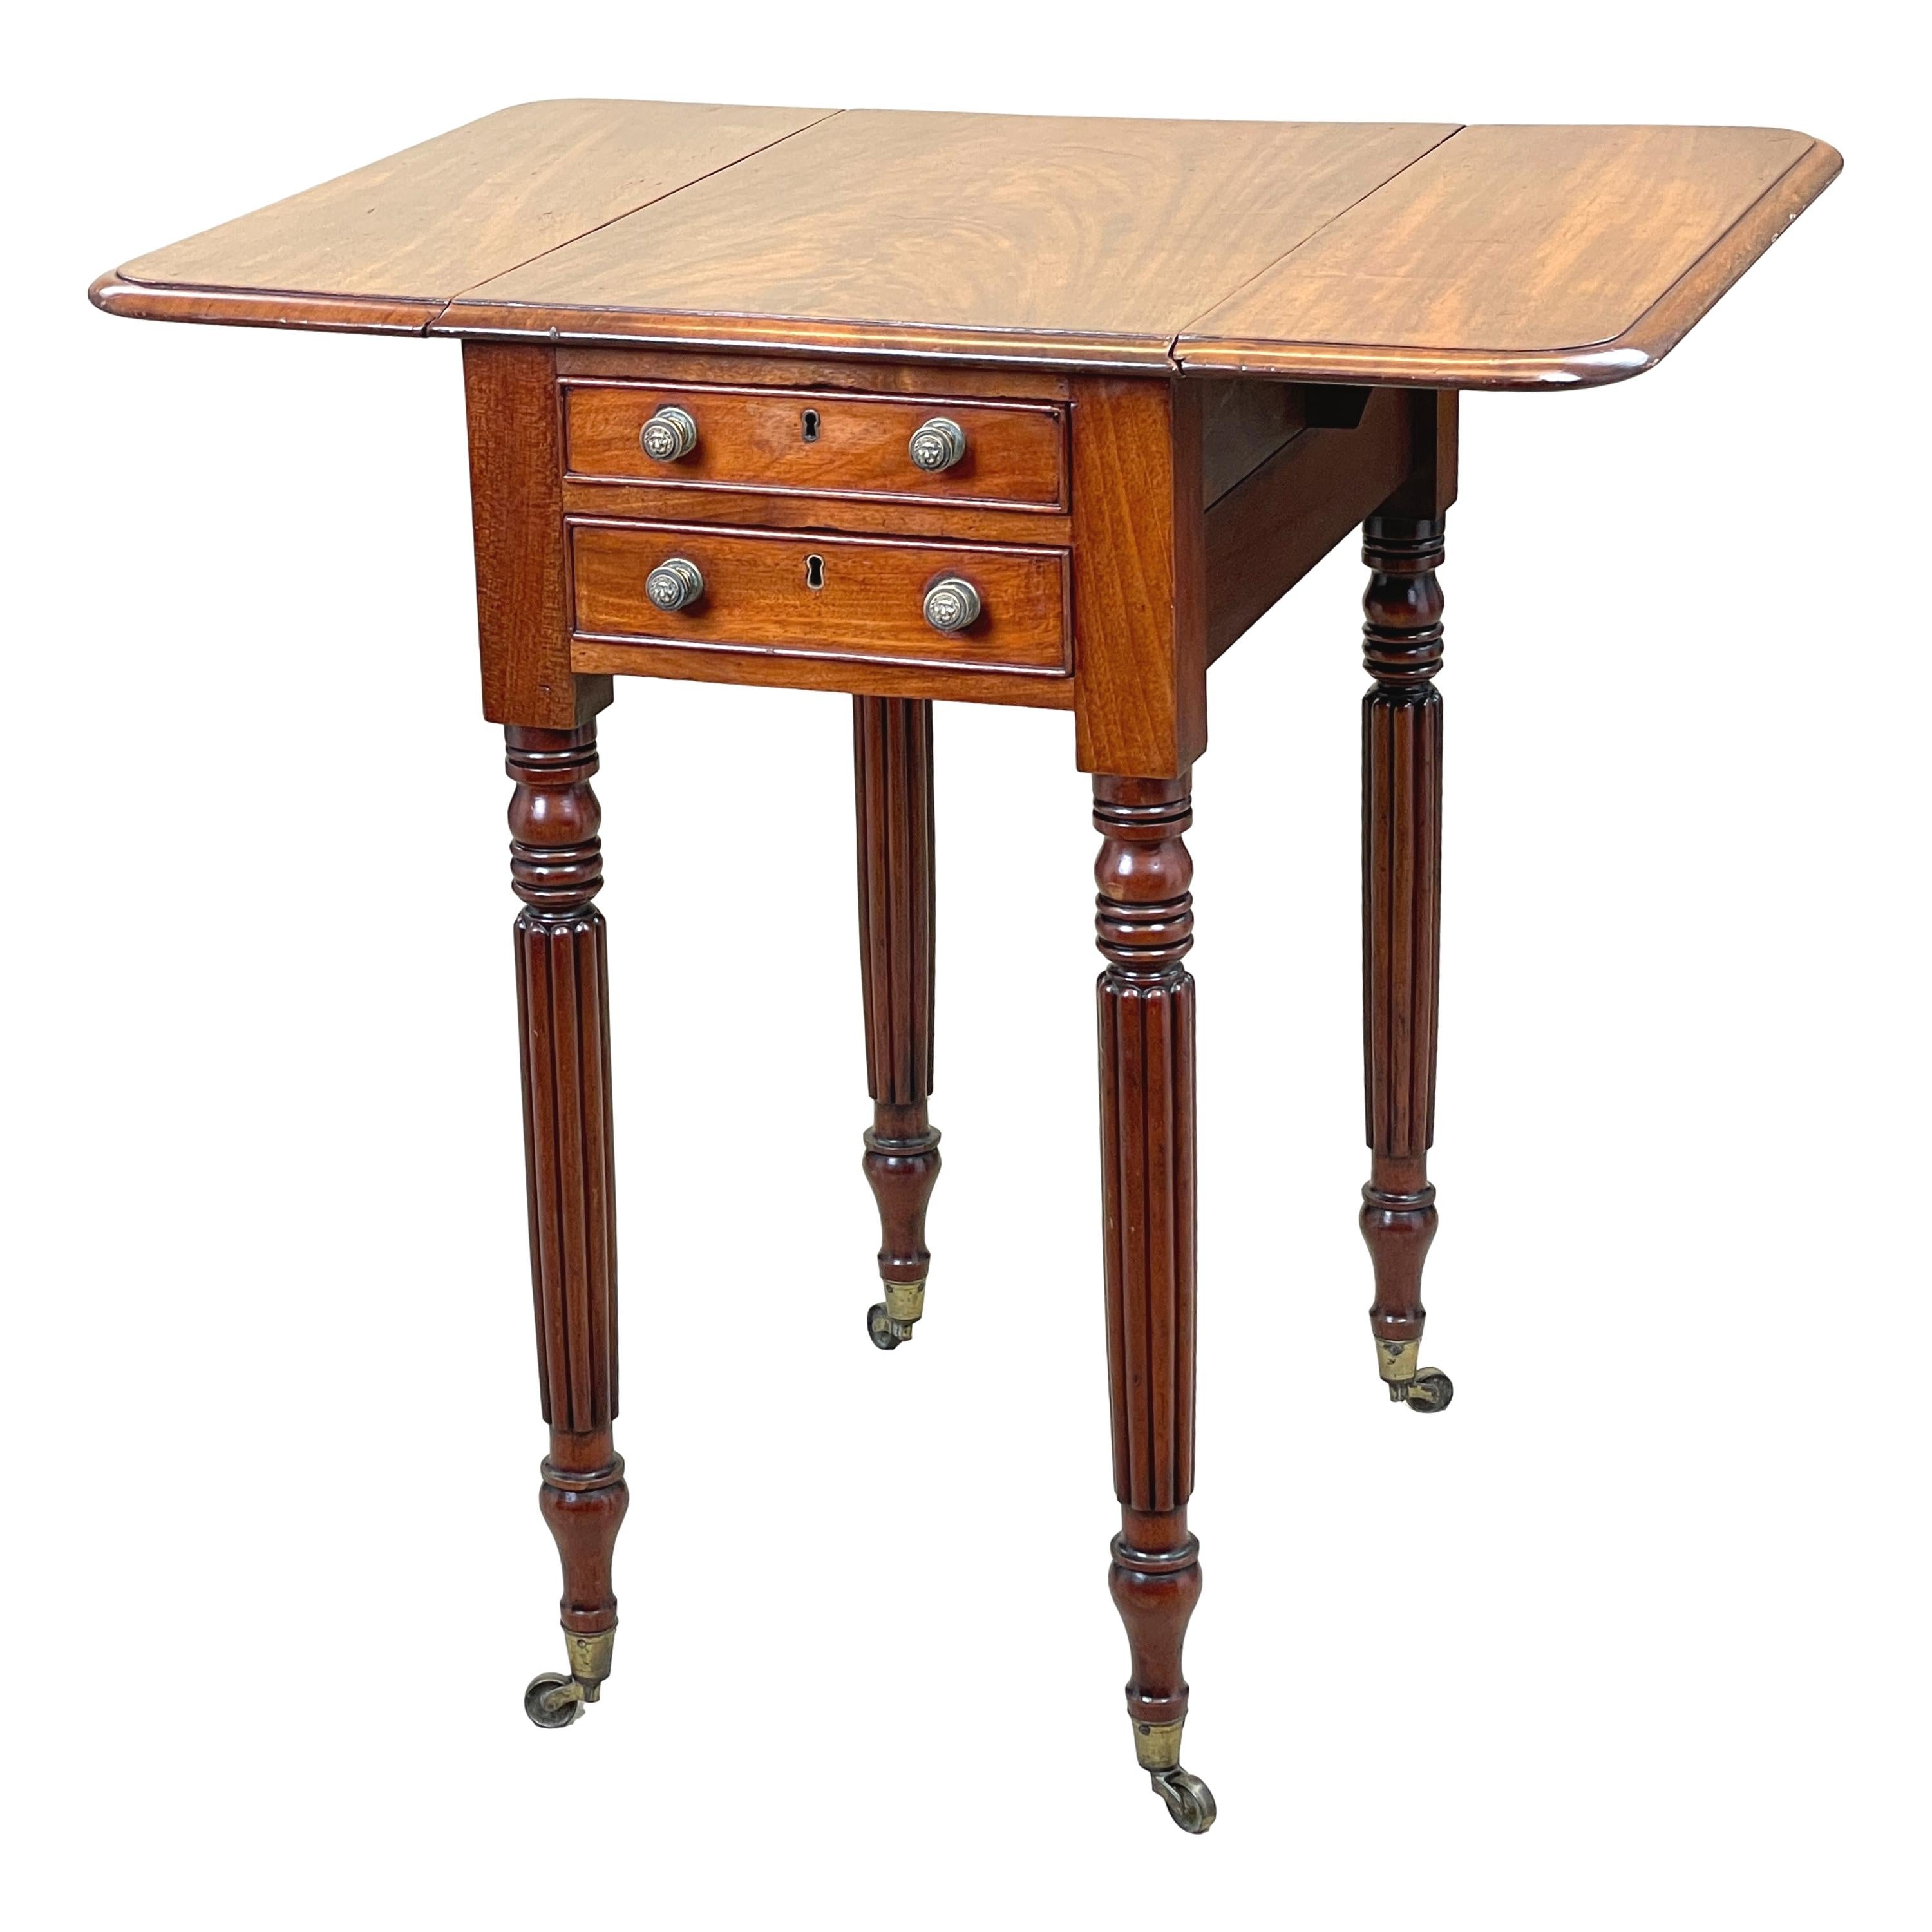 A very good quality regency period mahogany baby Pembroke table having
well figured top with flap to either side and two frieze drawers opposed by
two false drawers to reverse raised on elegant turned and reeded legs
with original brass